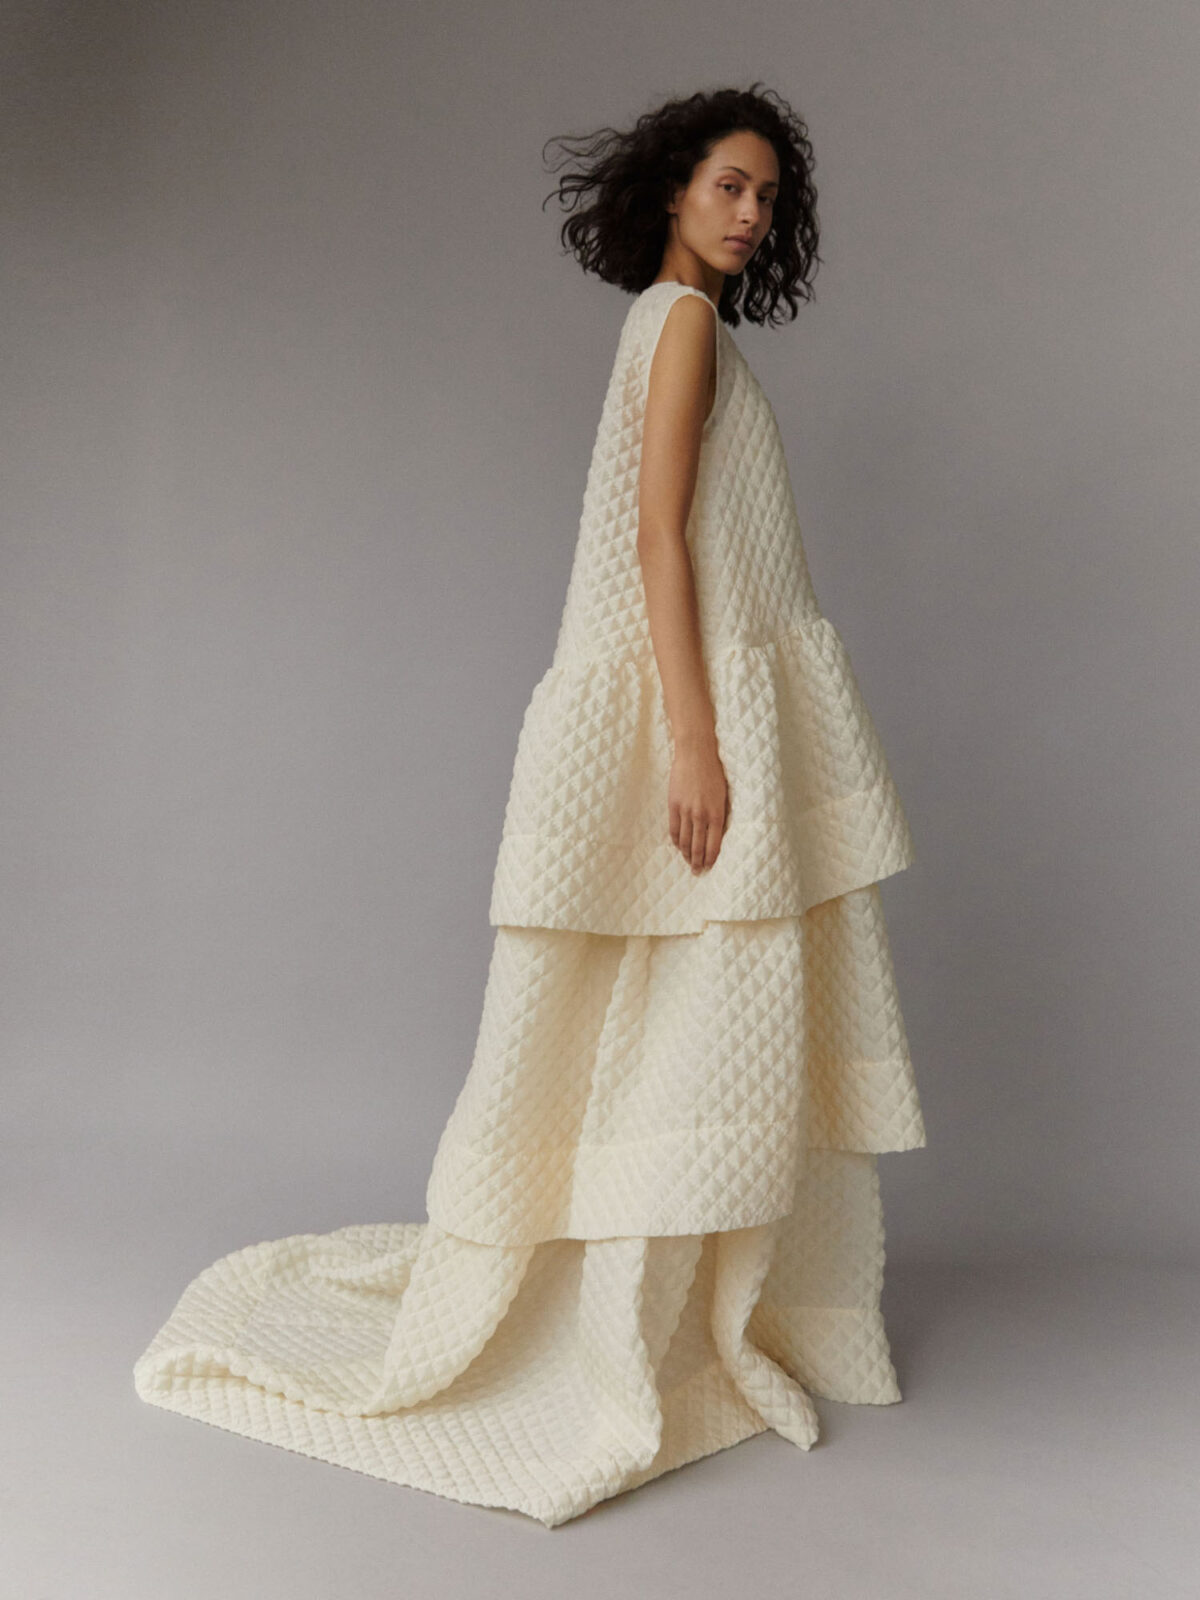 contemporary, oversized wedding outfit; oversized mini dress and voluminous tiered skirt in buttermilk cloqué